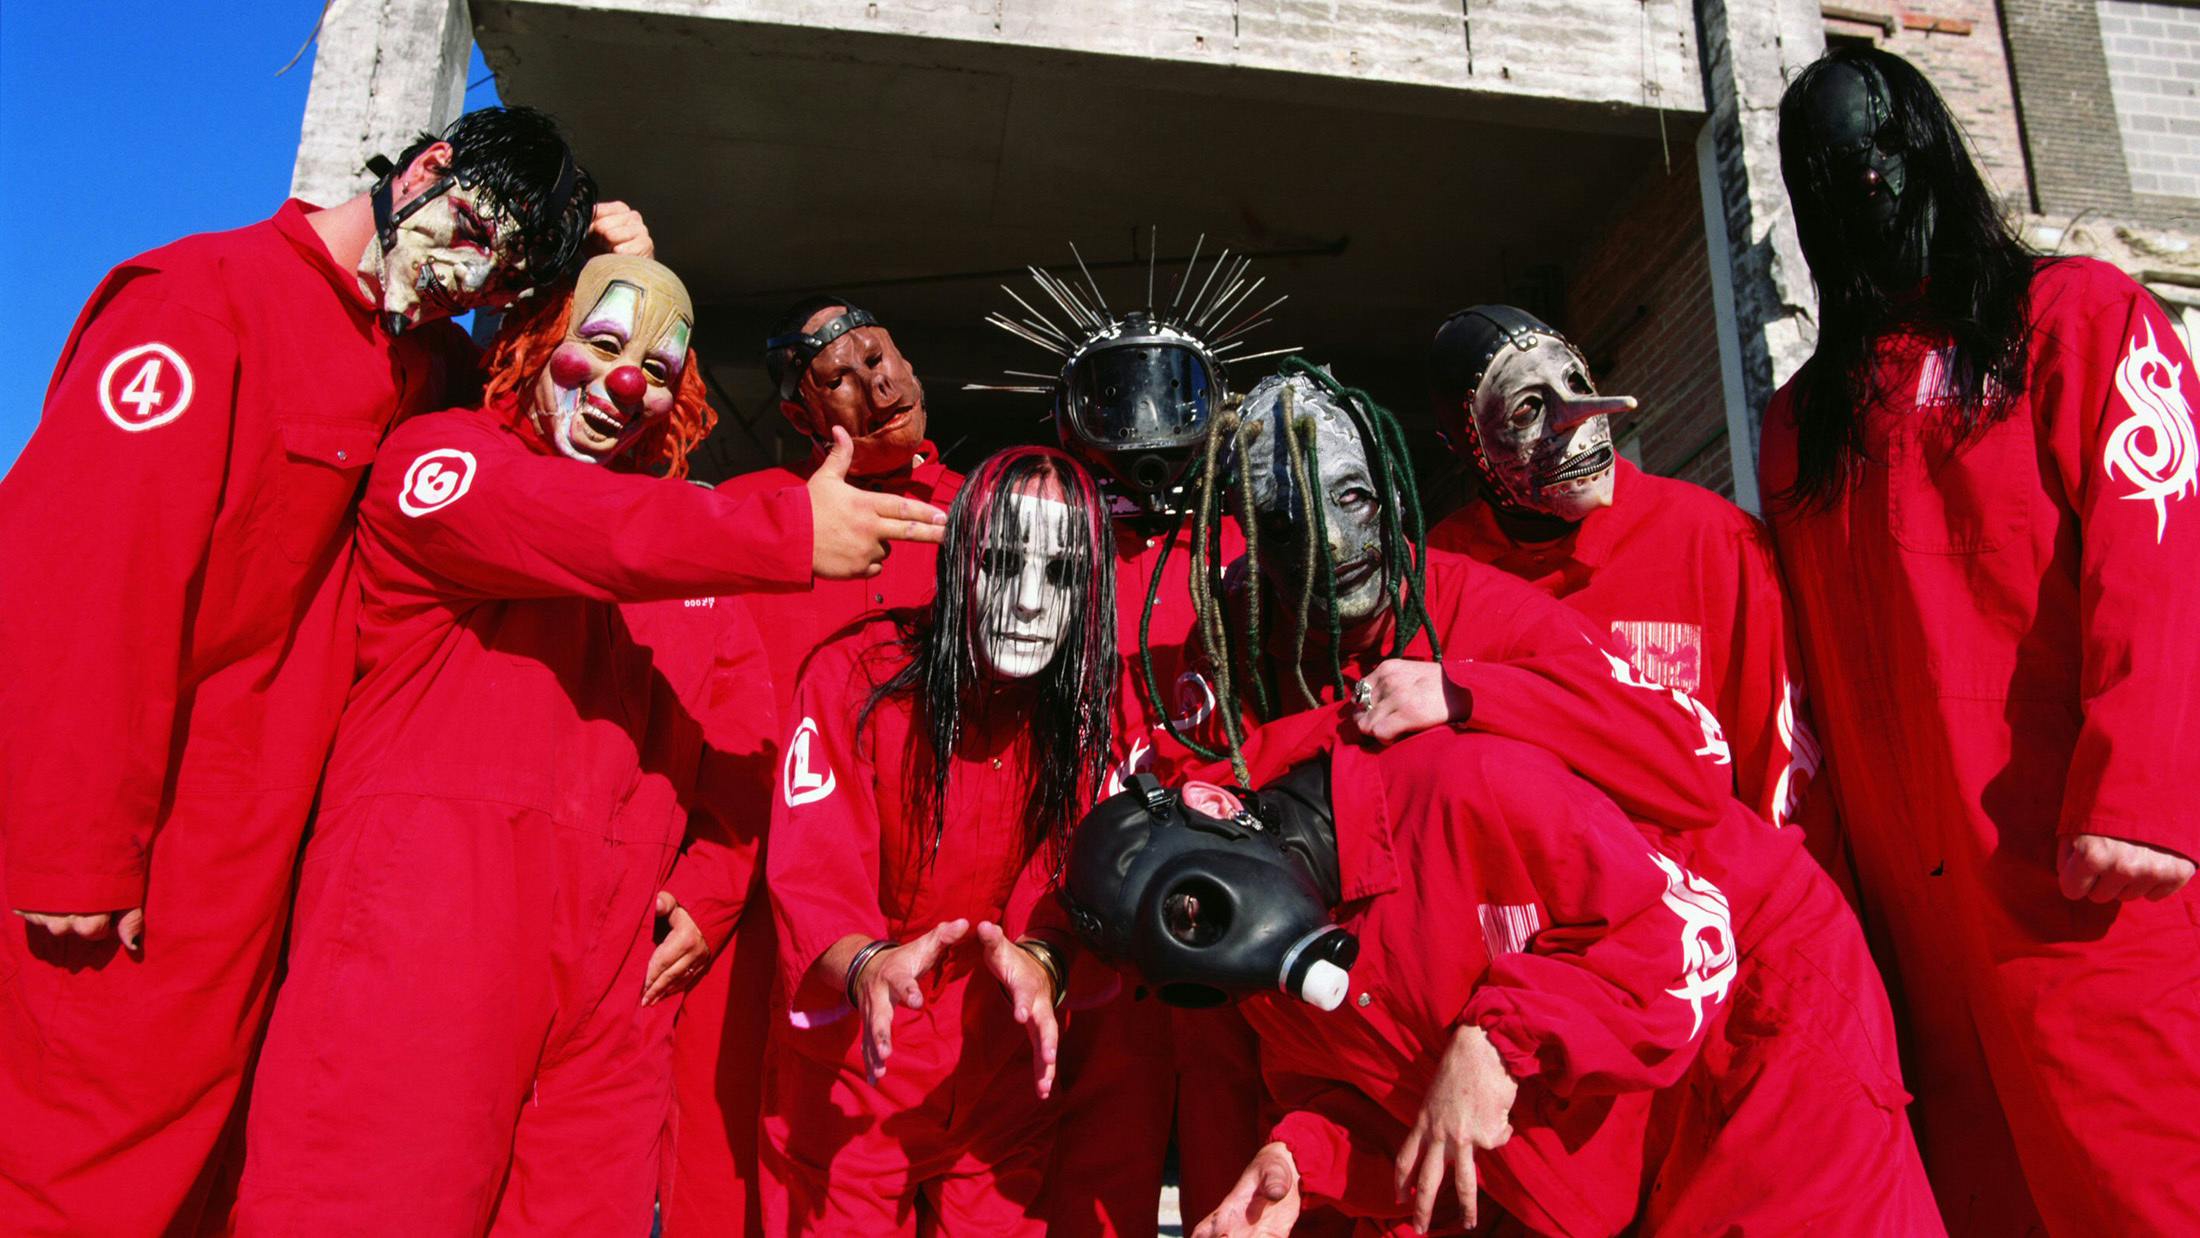 Roadrunner Records A&R pays tribute to Joey Jordison, recalls signing Slipknot